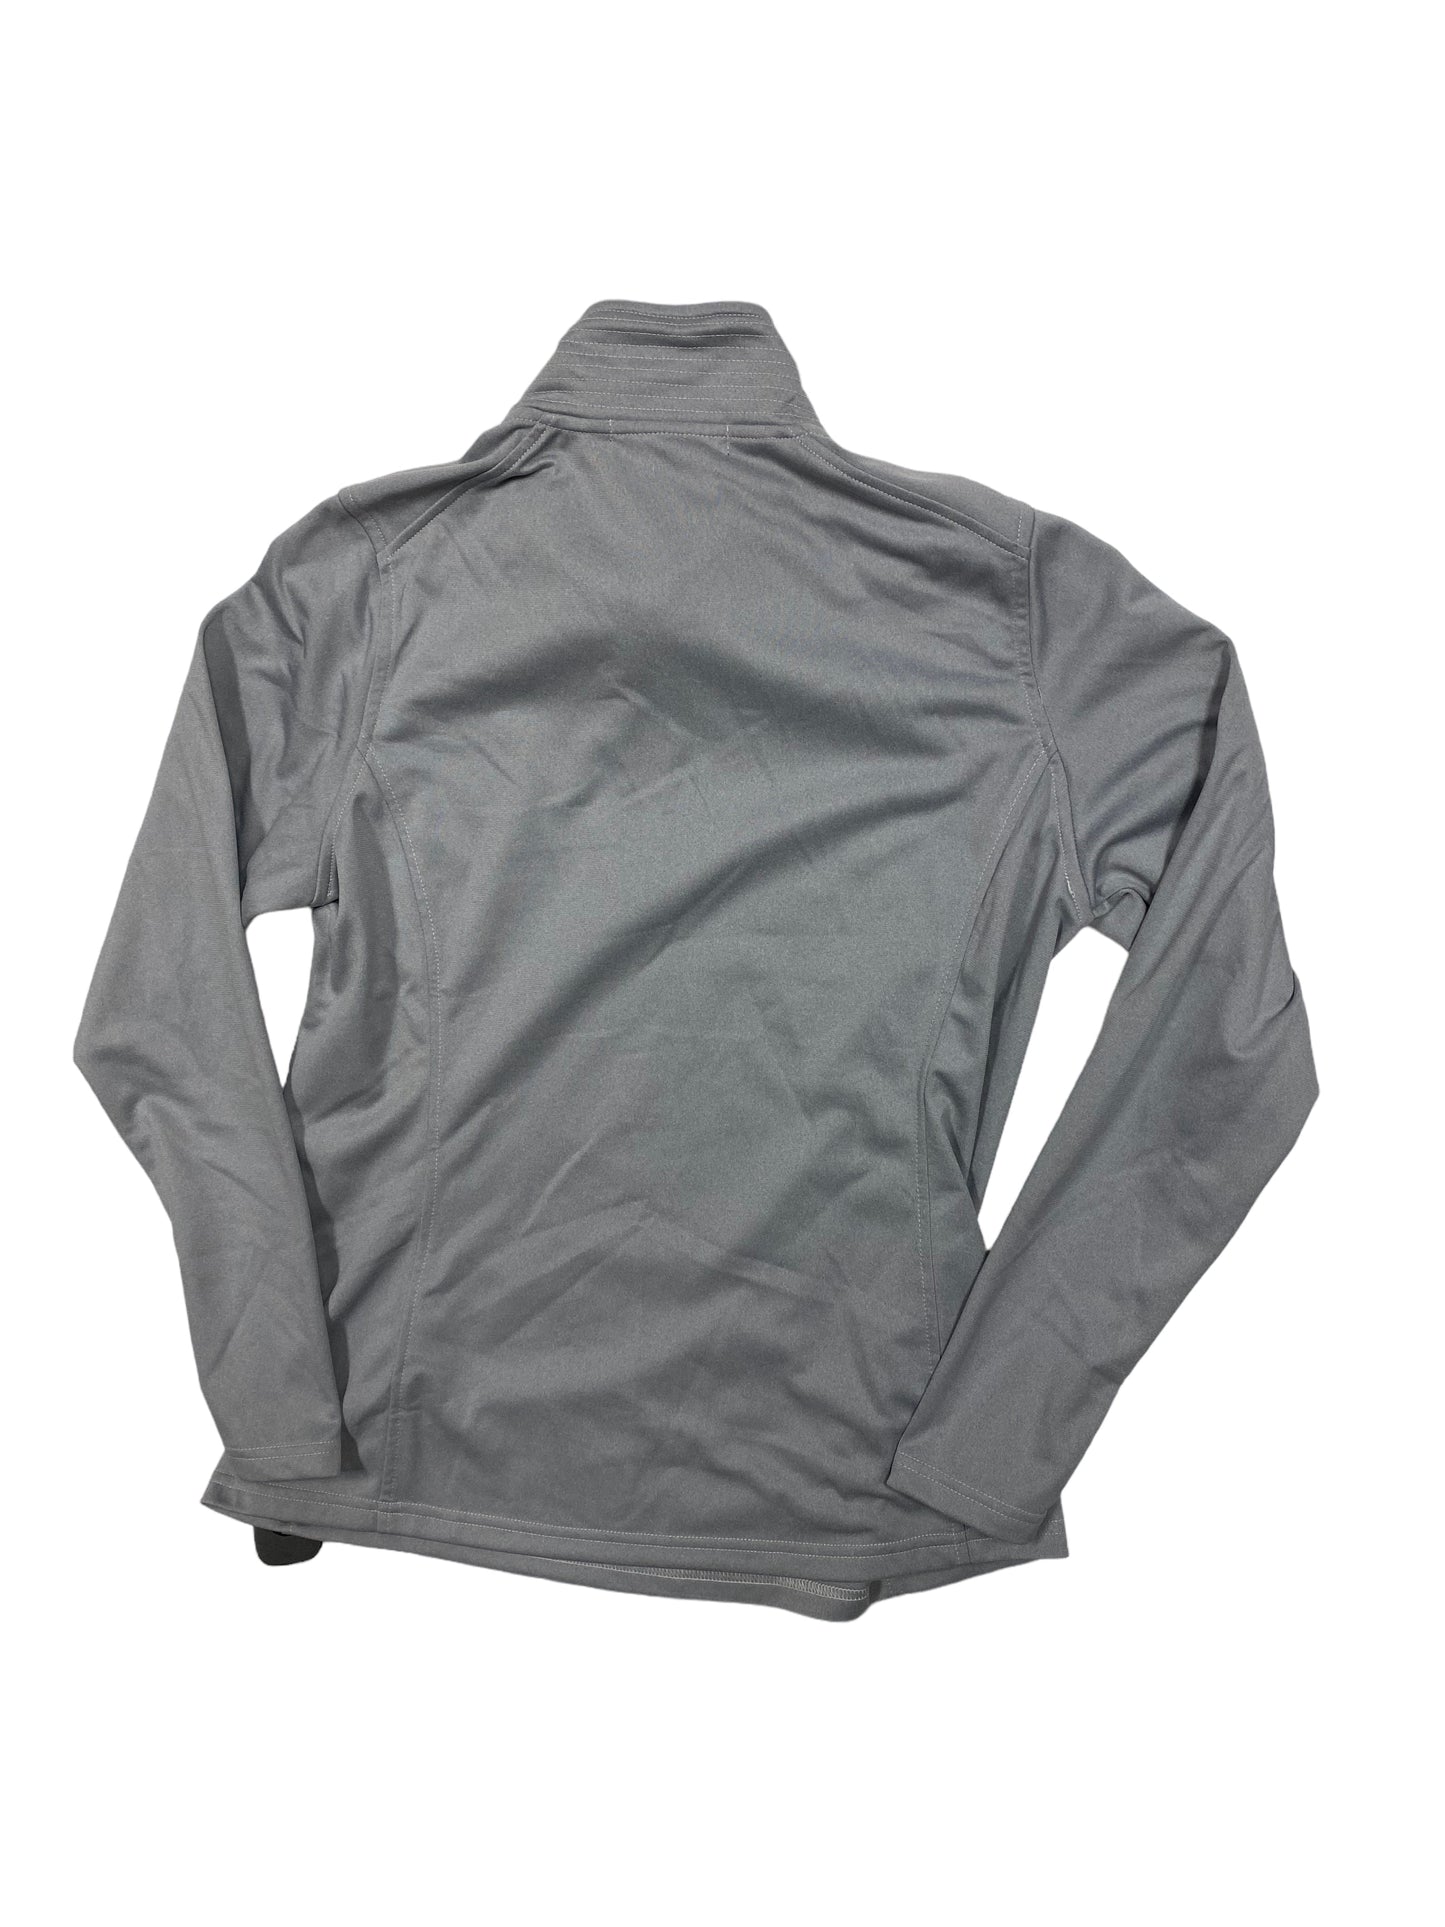 Grey Athletic Top Long Sleeve Collar The North Face, Size L